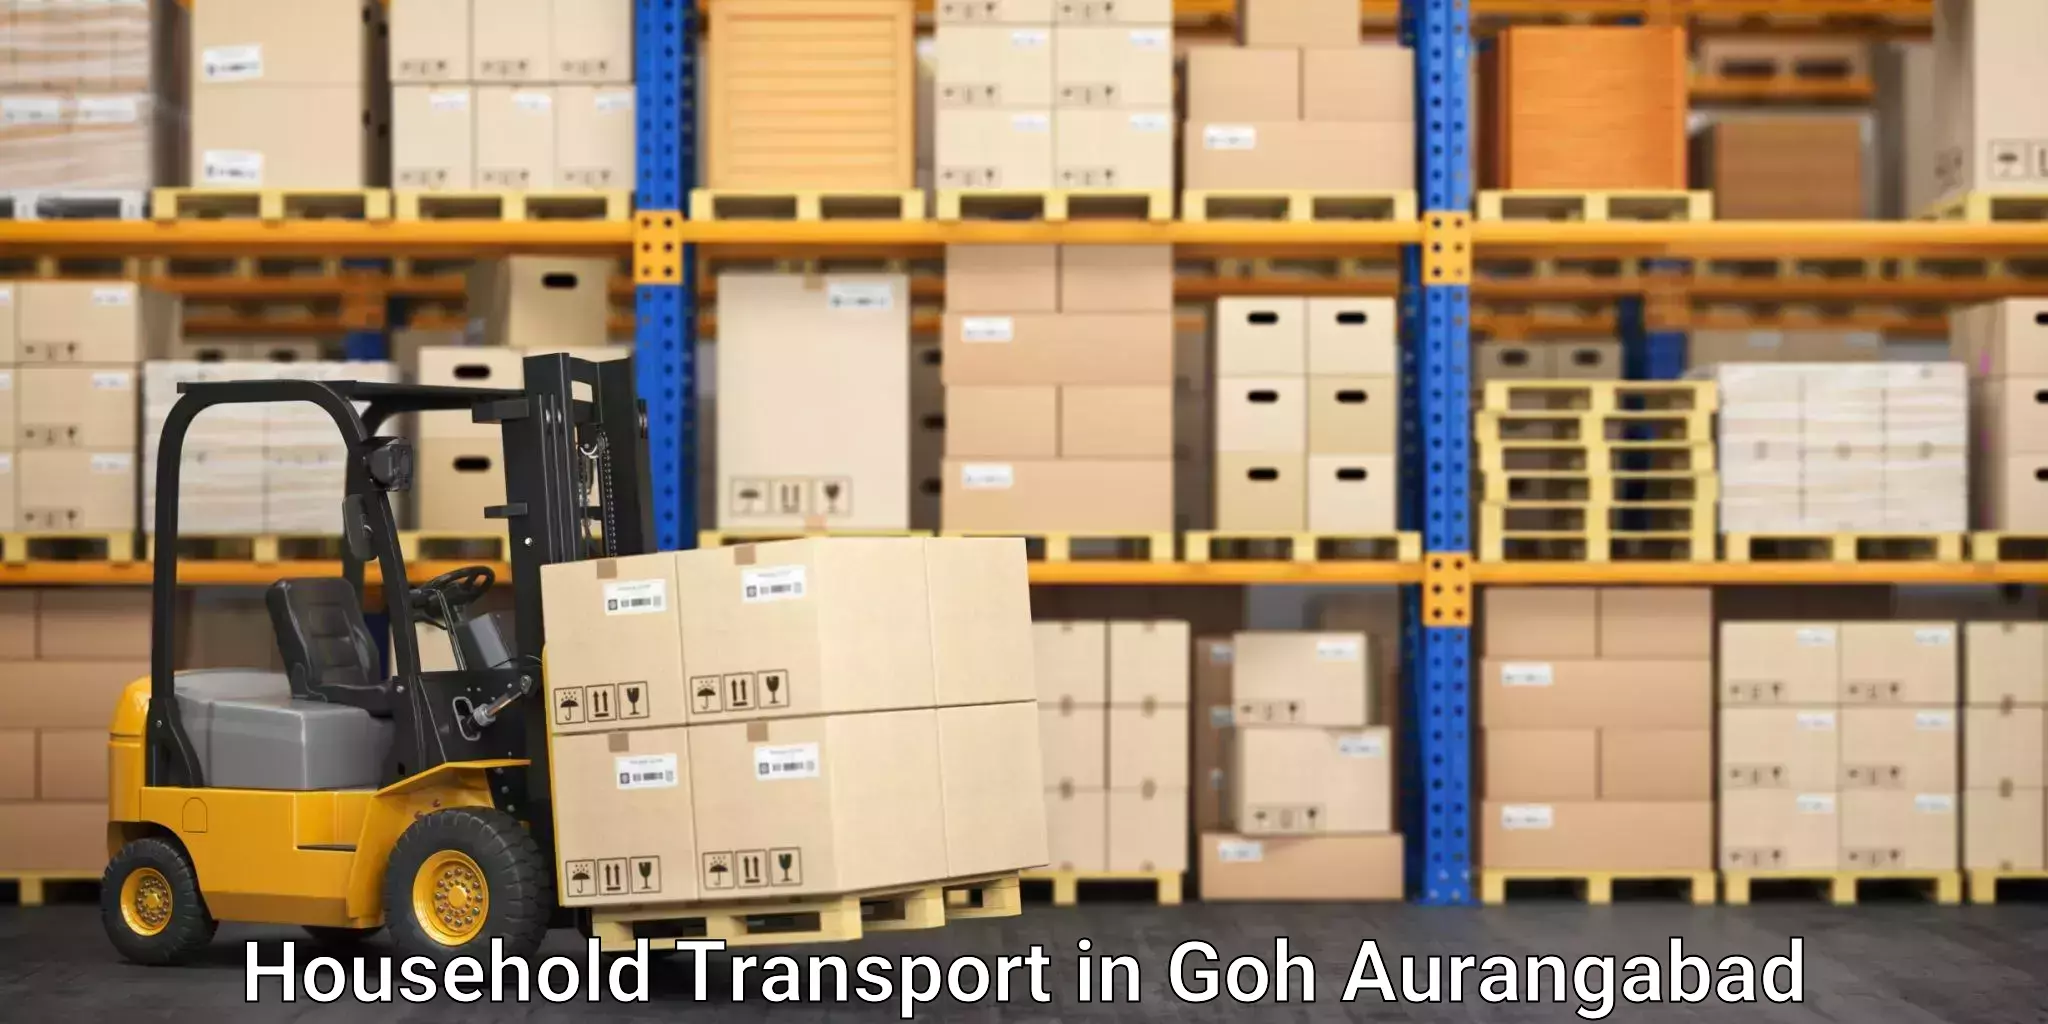 Reliable movers in Goh Aurangabad